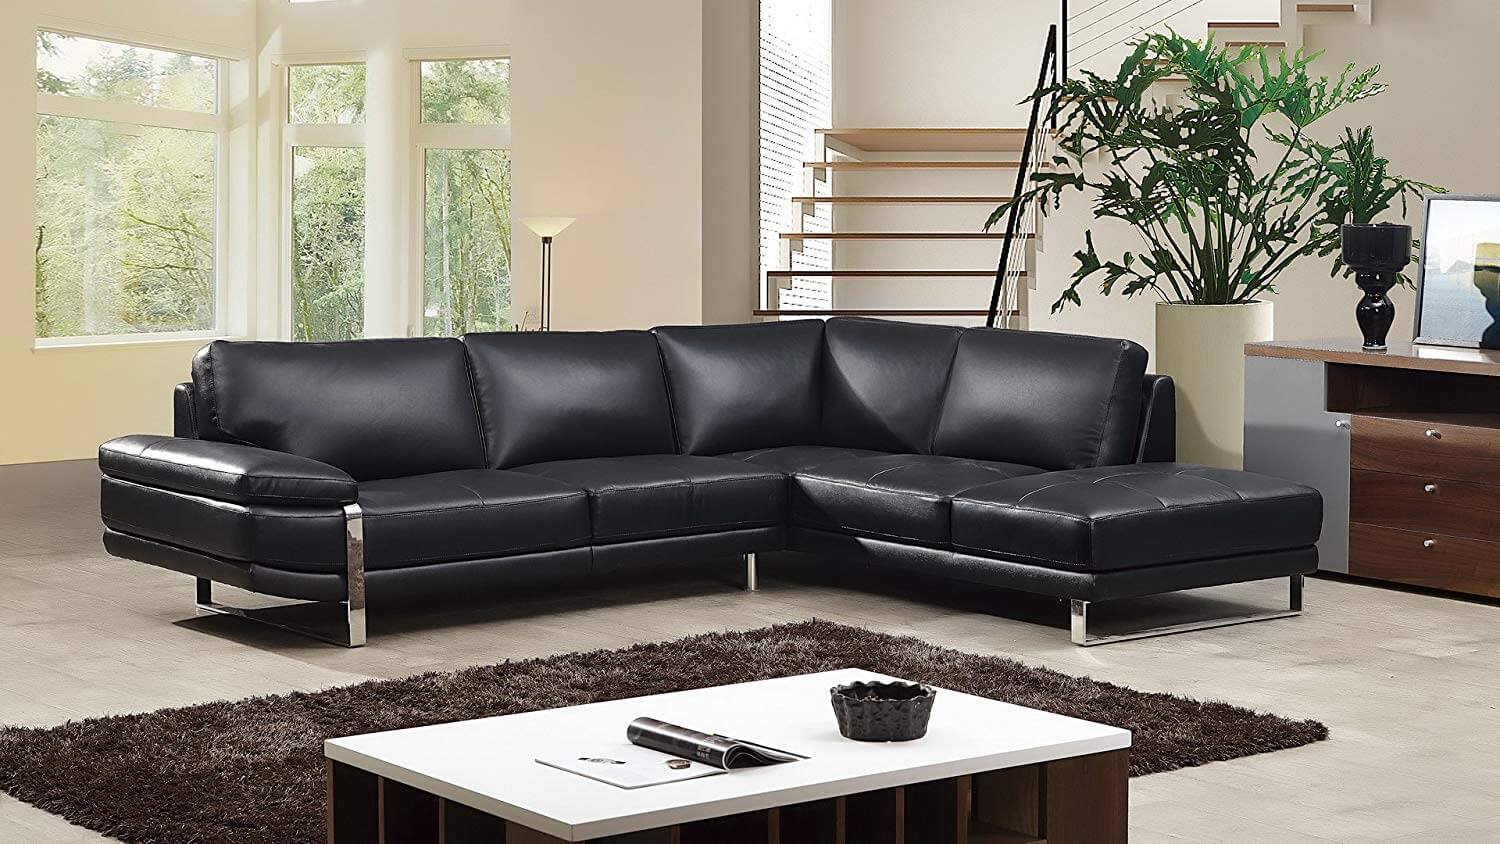 Best Leather Sofa Brands, Best Brand Leather Furniture